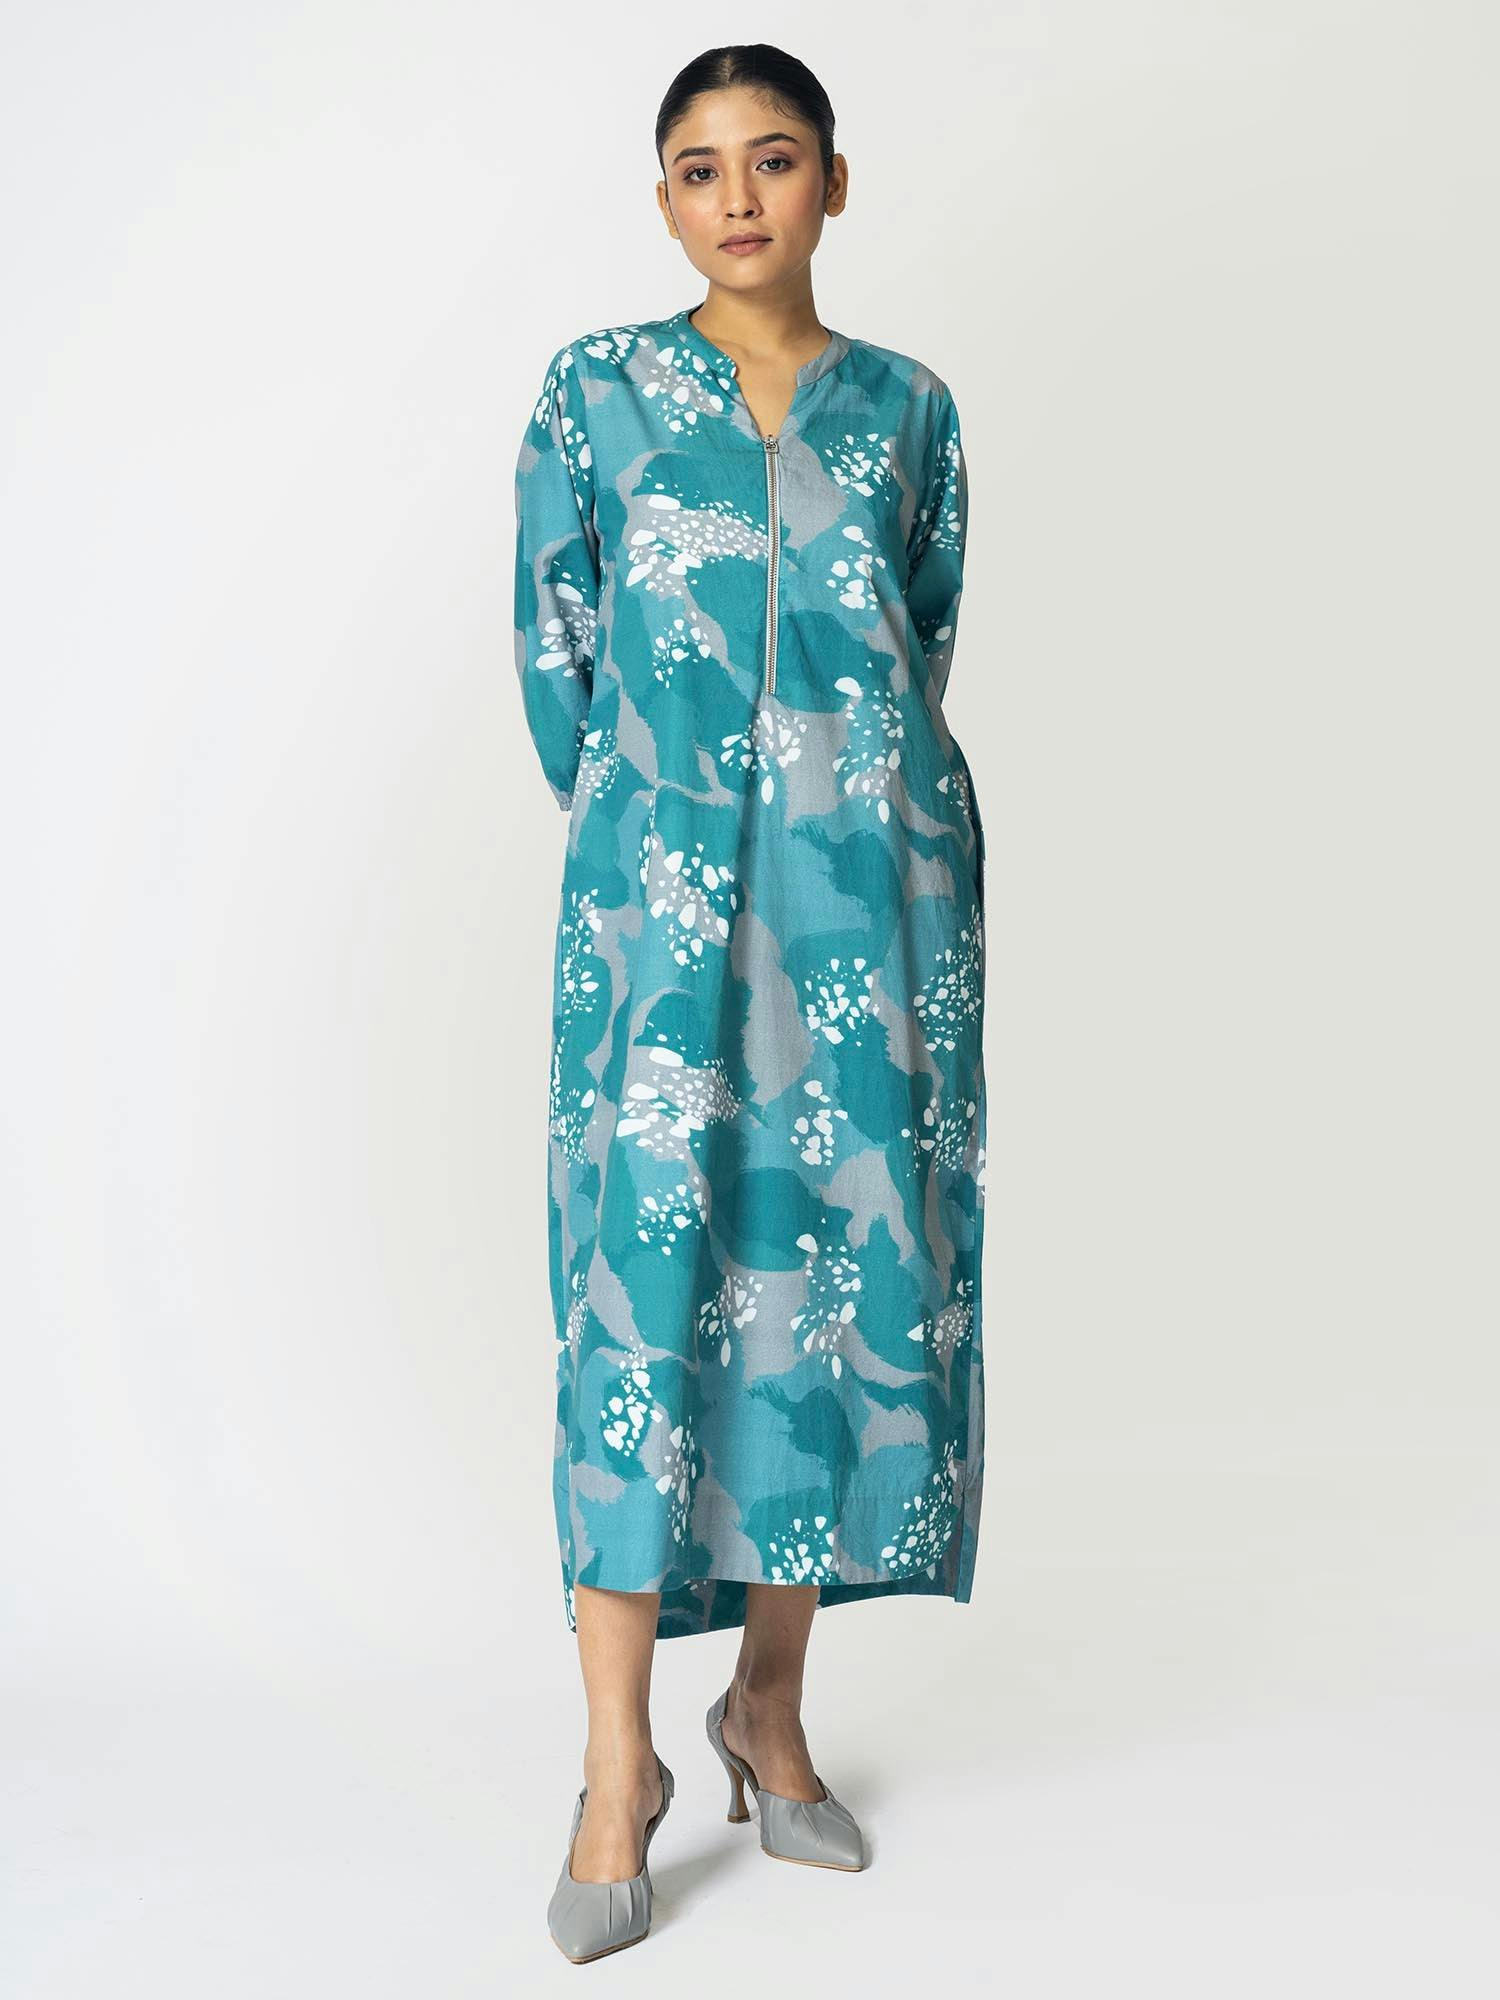 Dots Teal Dress with Zipper, a product by KLAD